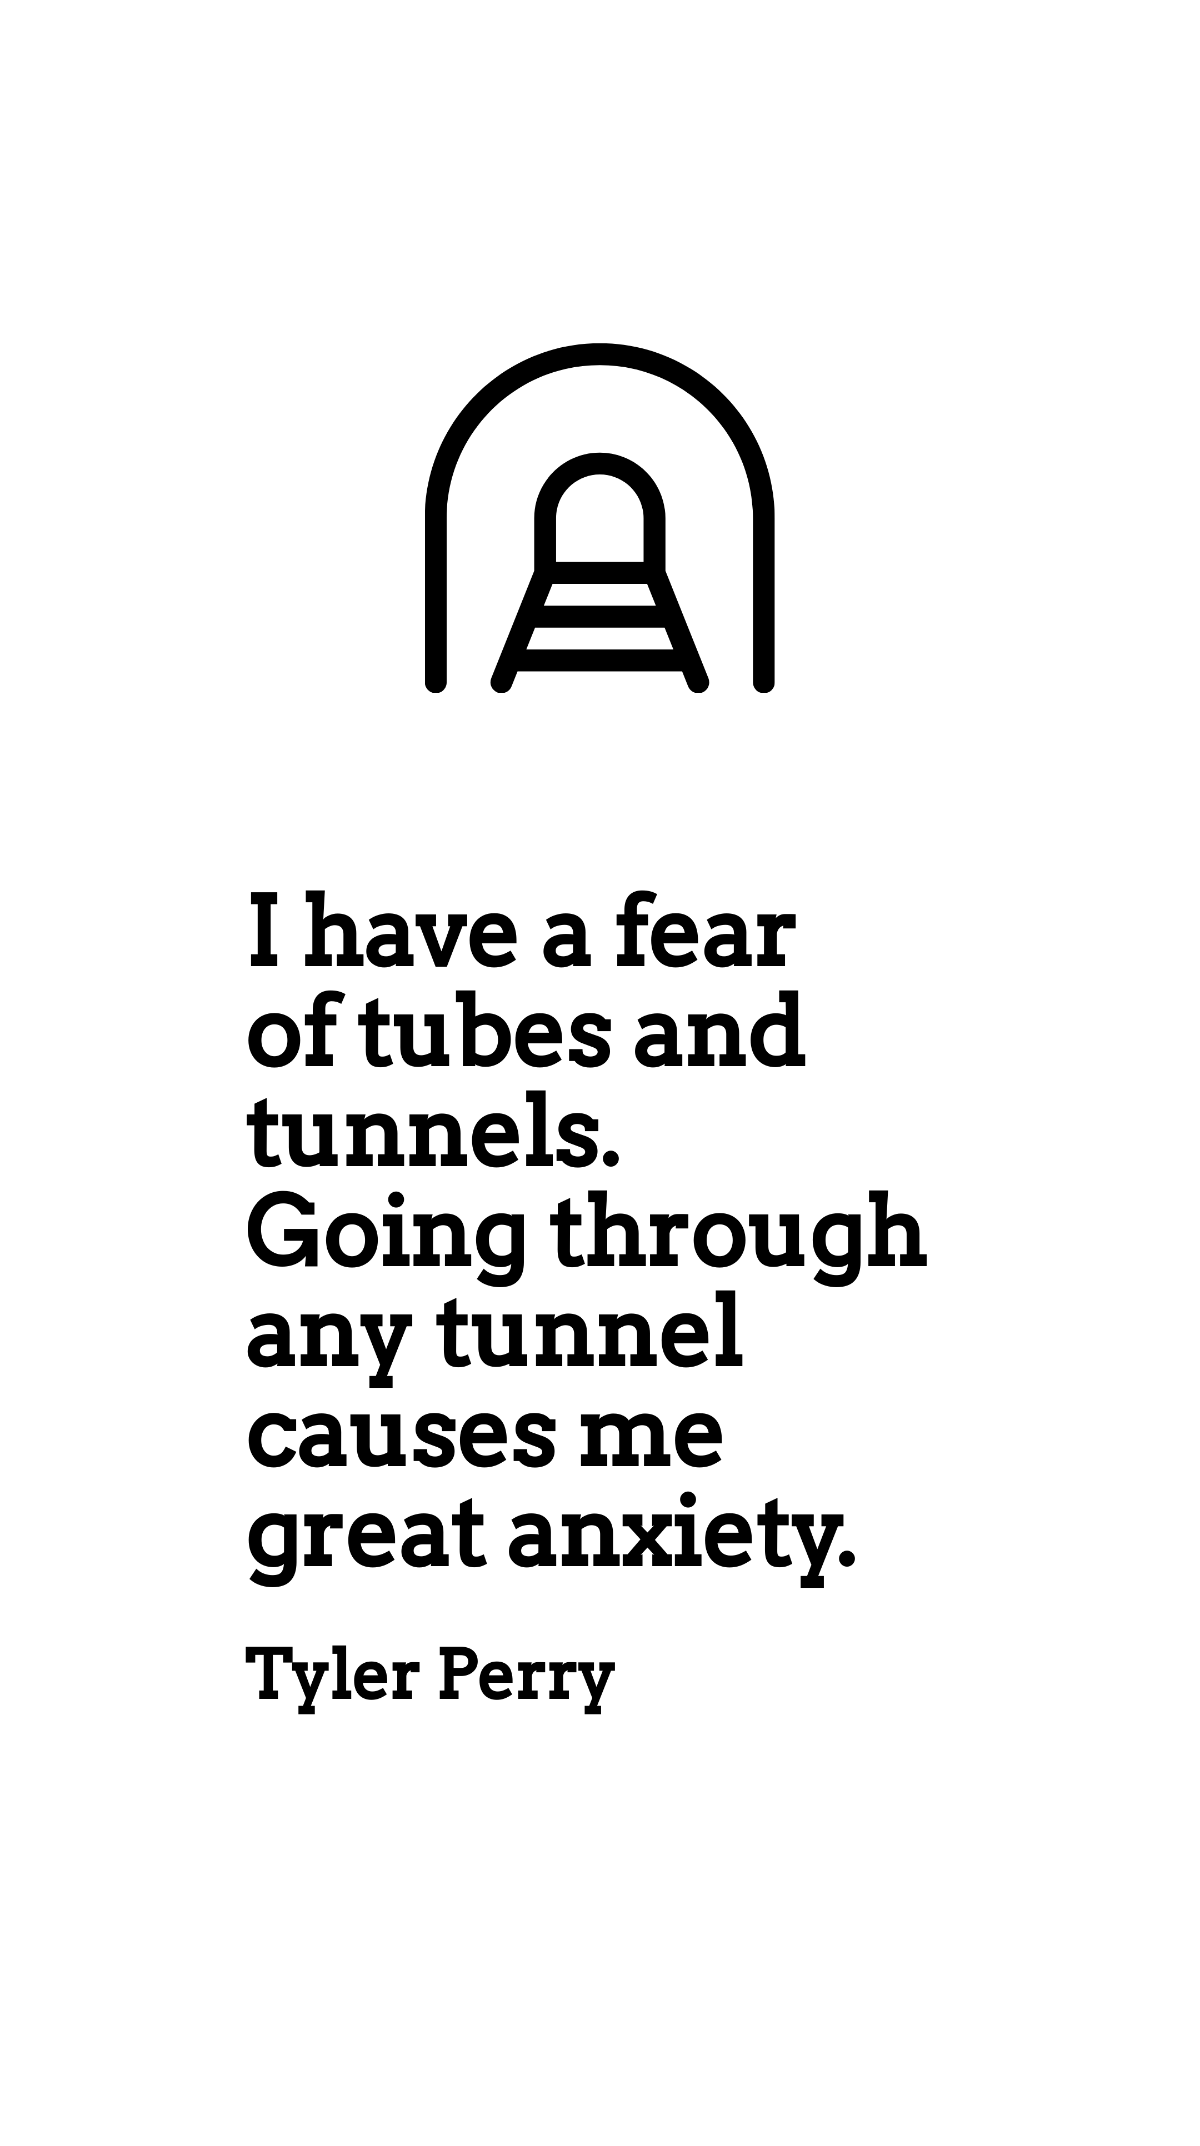 Free Tyler Perry - I have a fear of tubes and tunnels. Going through any tunnel causes me great anxiety. Template